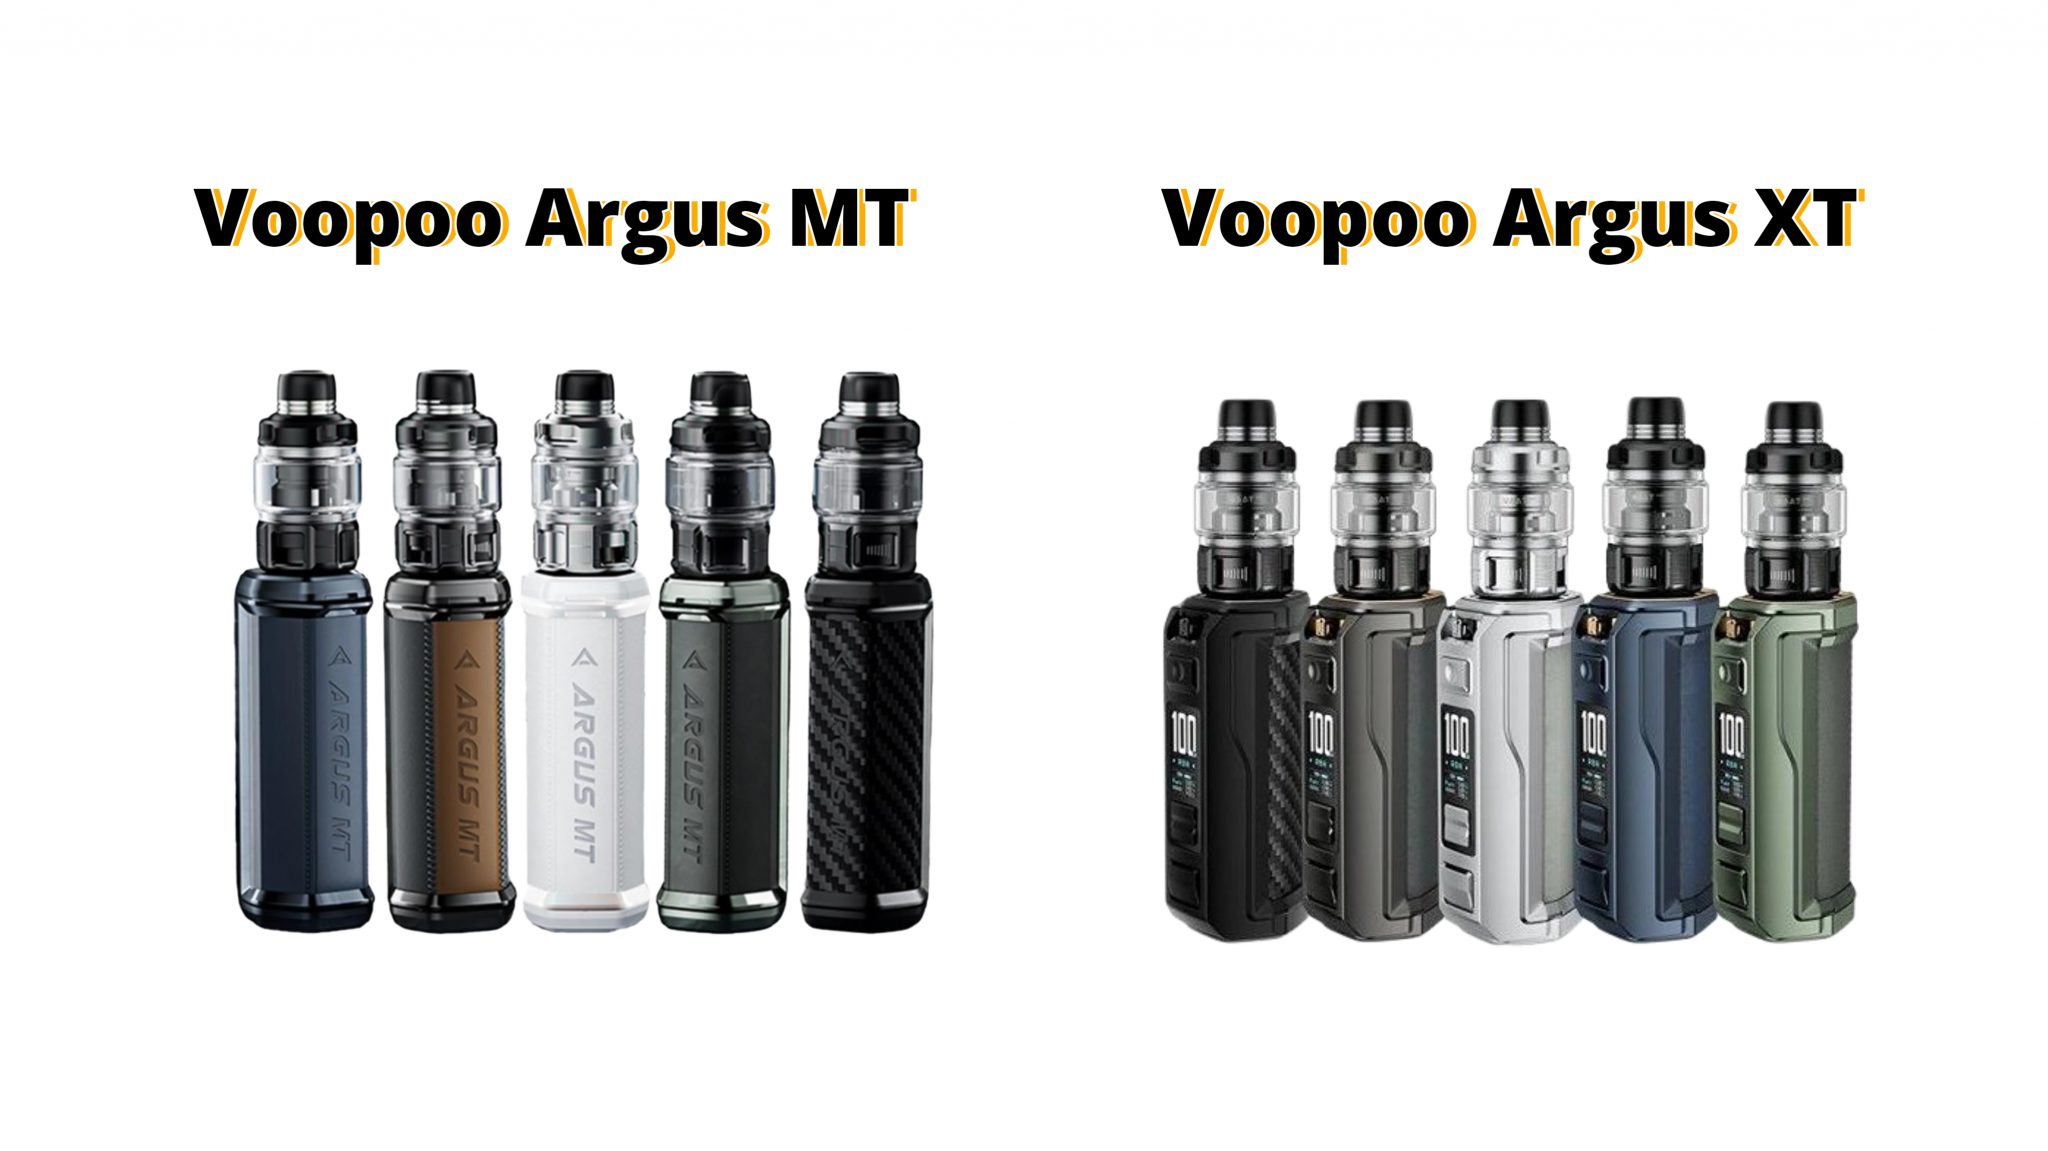 Voopoo Argus XT and MT